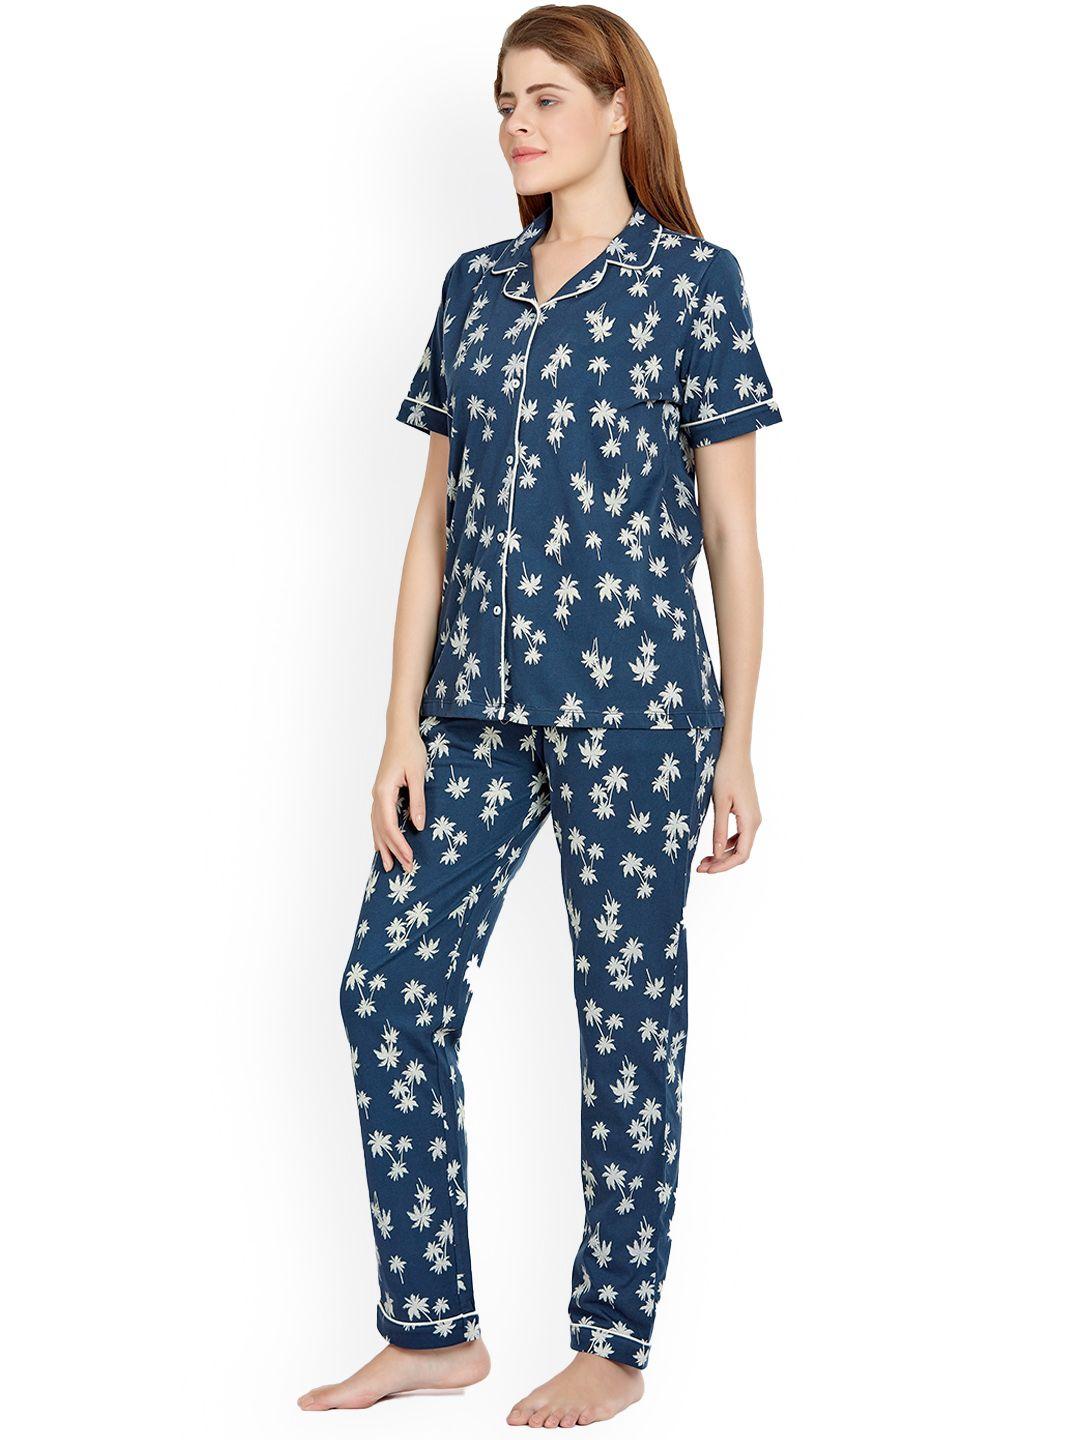 maysixty women navy blue & off white printed night suit